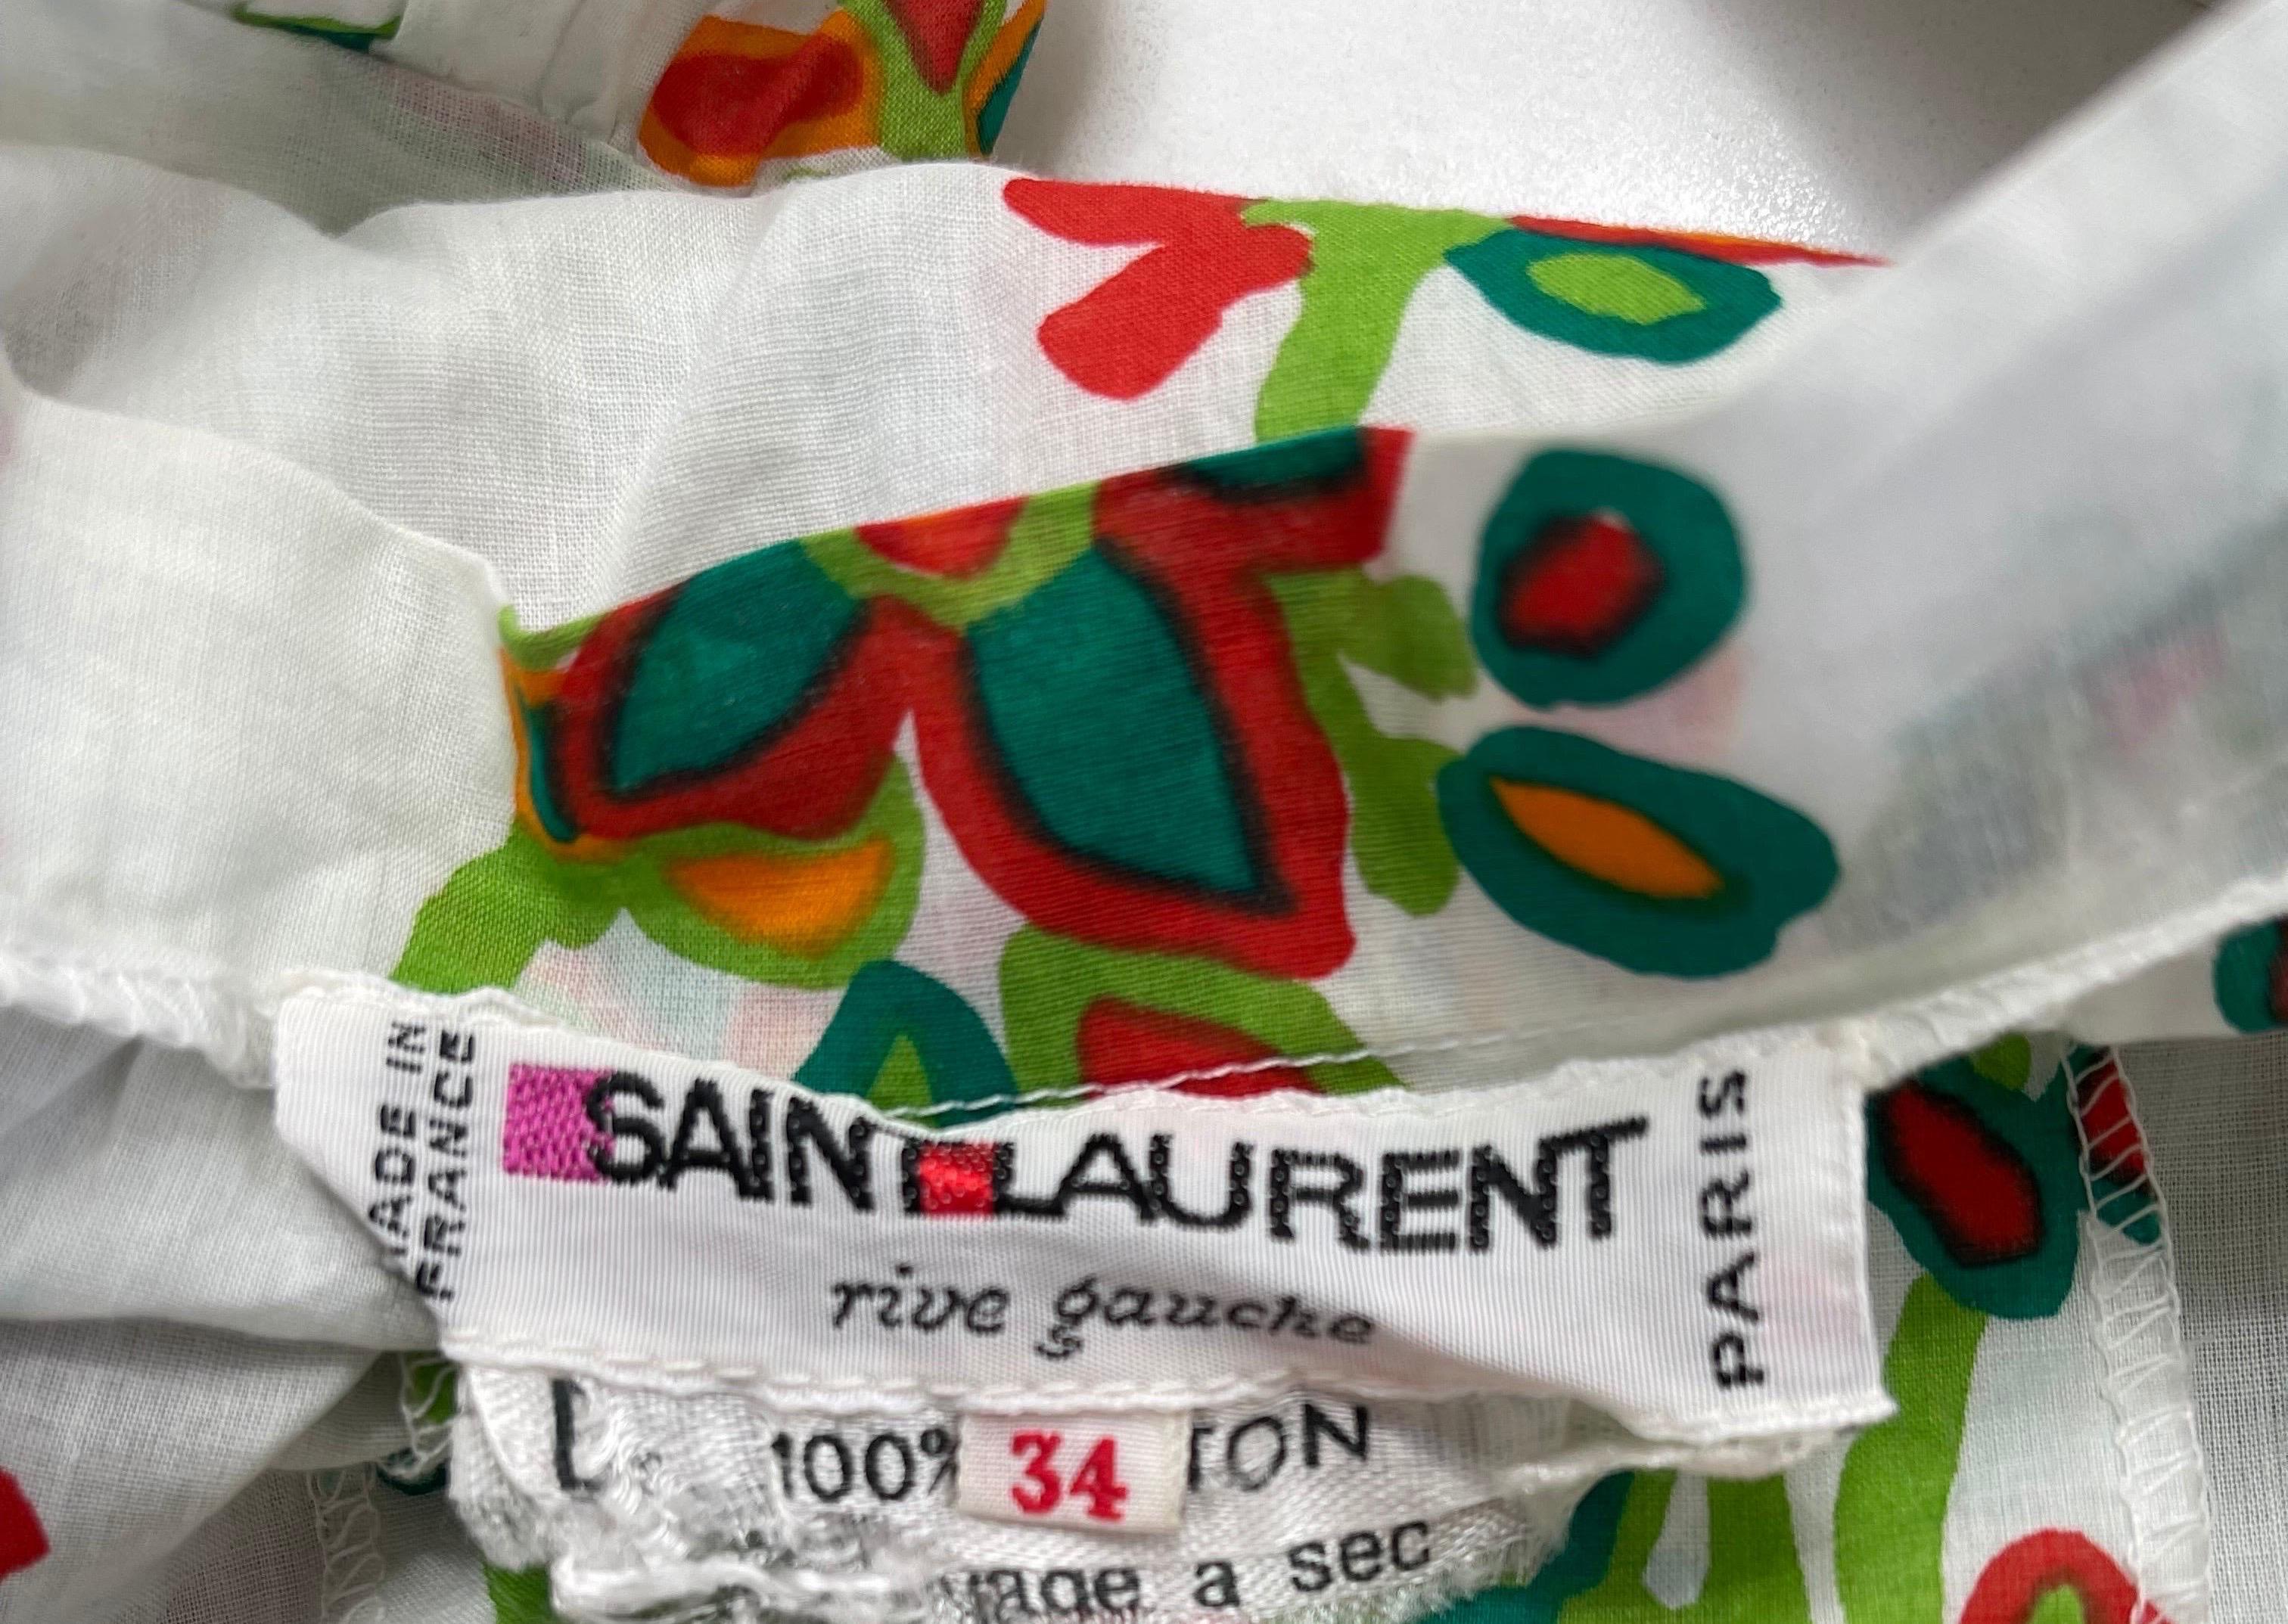 Chic vintage late 1970s YVES SAINT LAURENT Rive Gauche abstract floral print short puff sleeve blouse / shirt ! Lightweight cotton, features vibrant colors of burnt orange, marigold, green, and lime green throughout. Buttons up the front with a tie